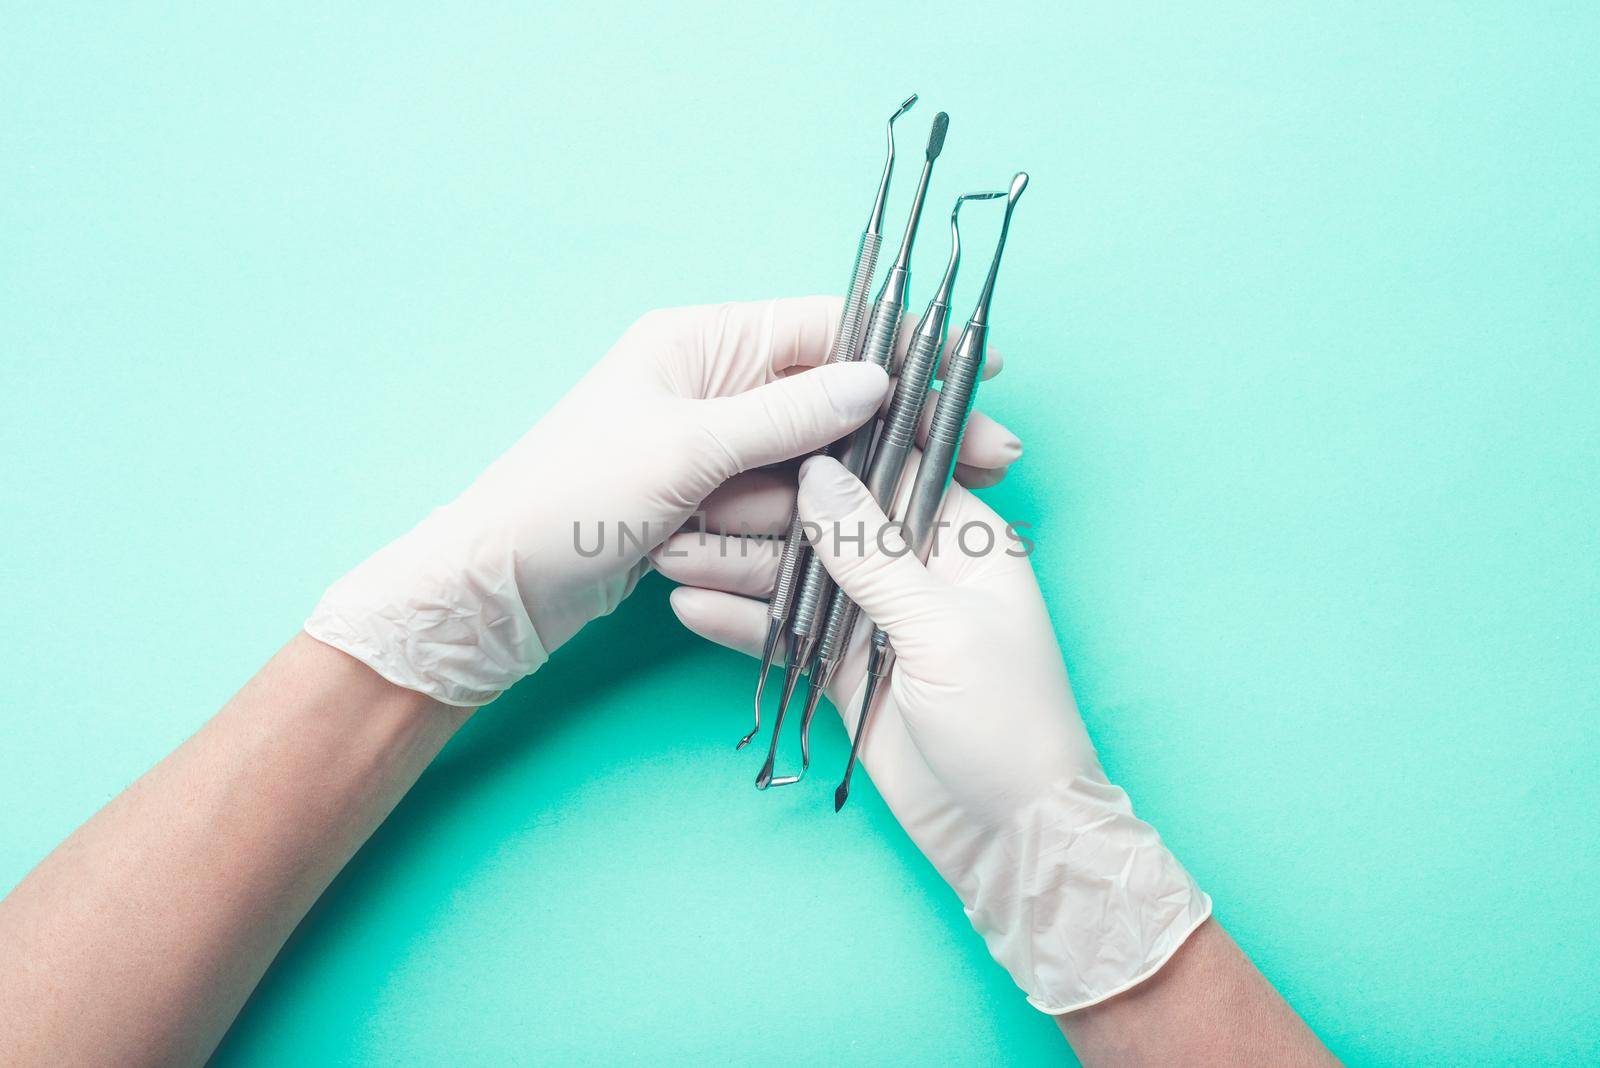 Hands in glove with dental tools on light turquoise background